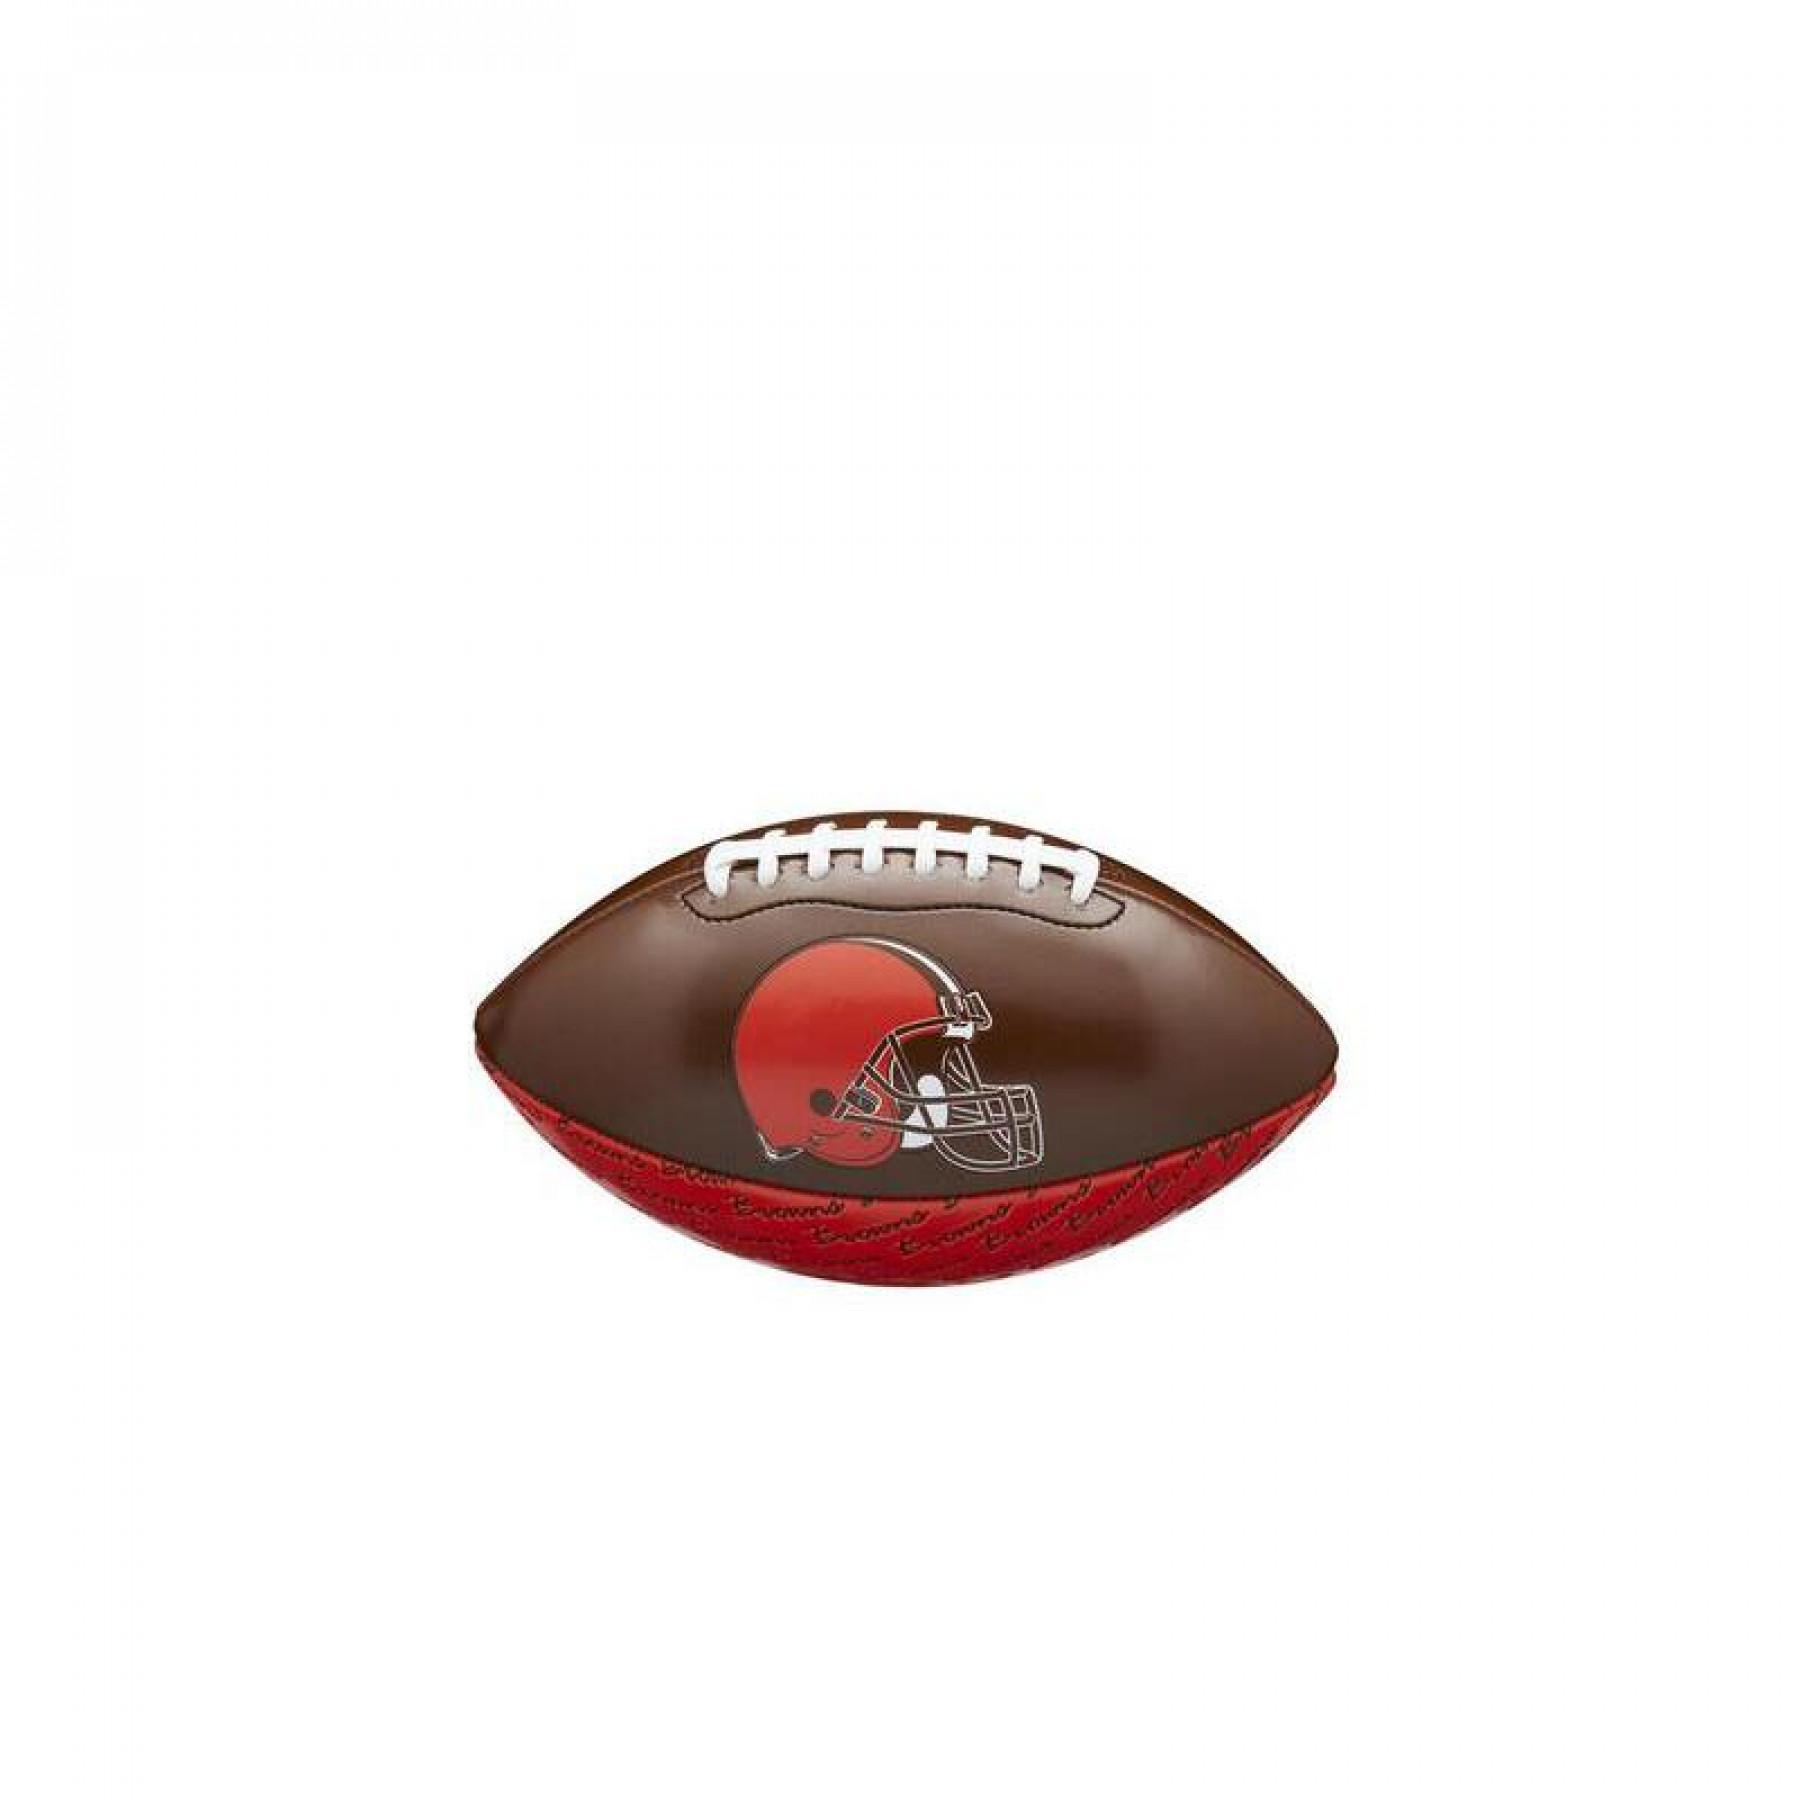 Miniball per bambini nfl Cleveland Browns